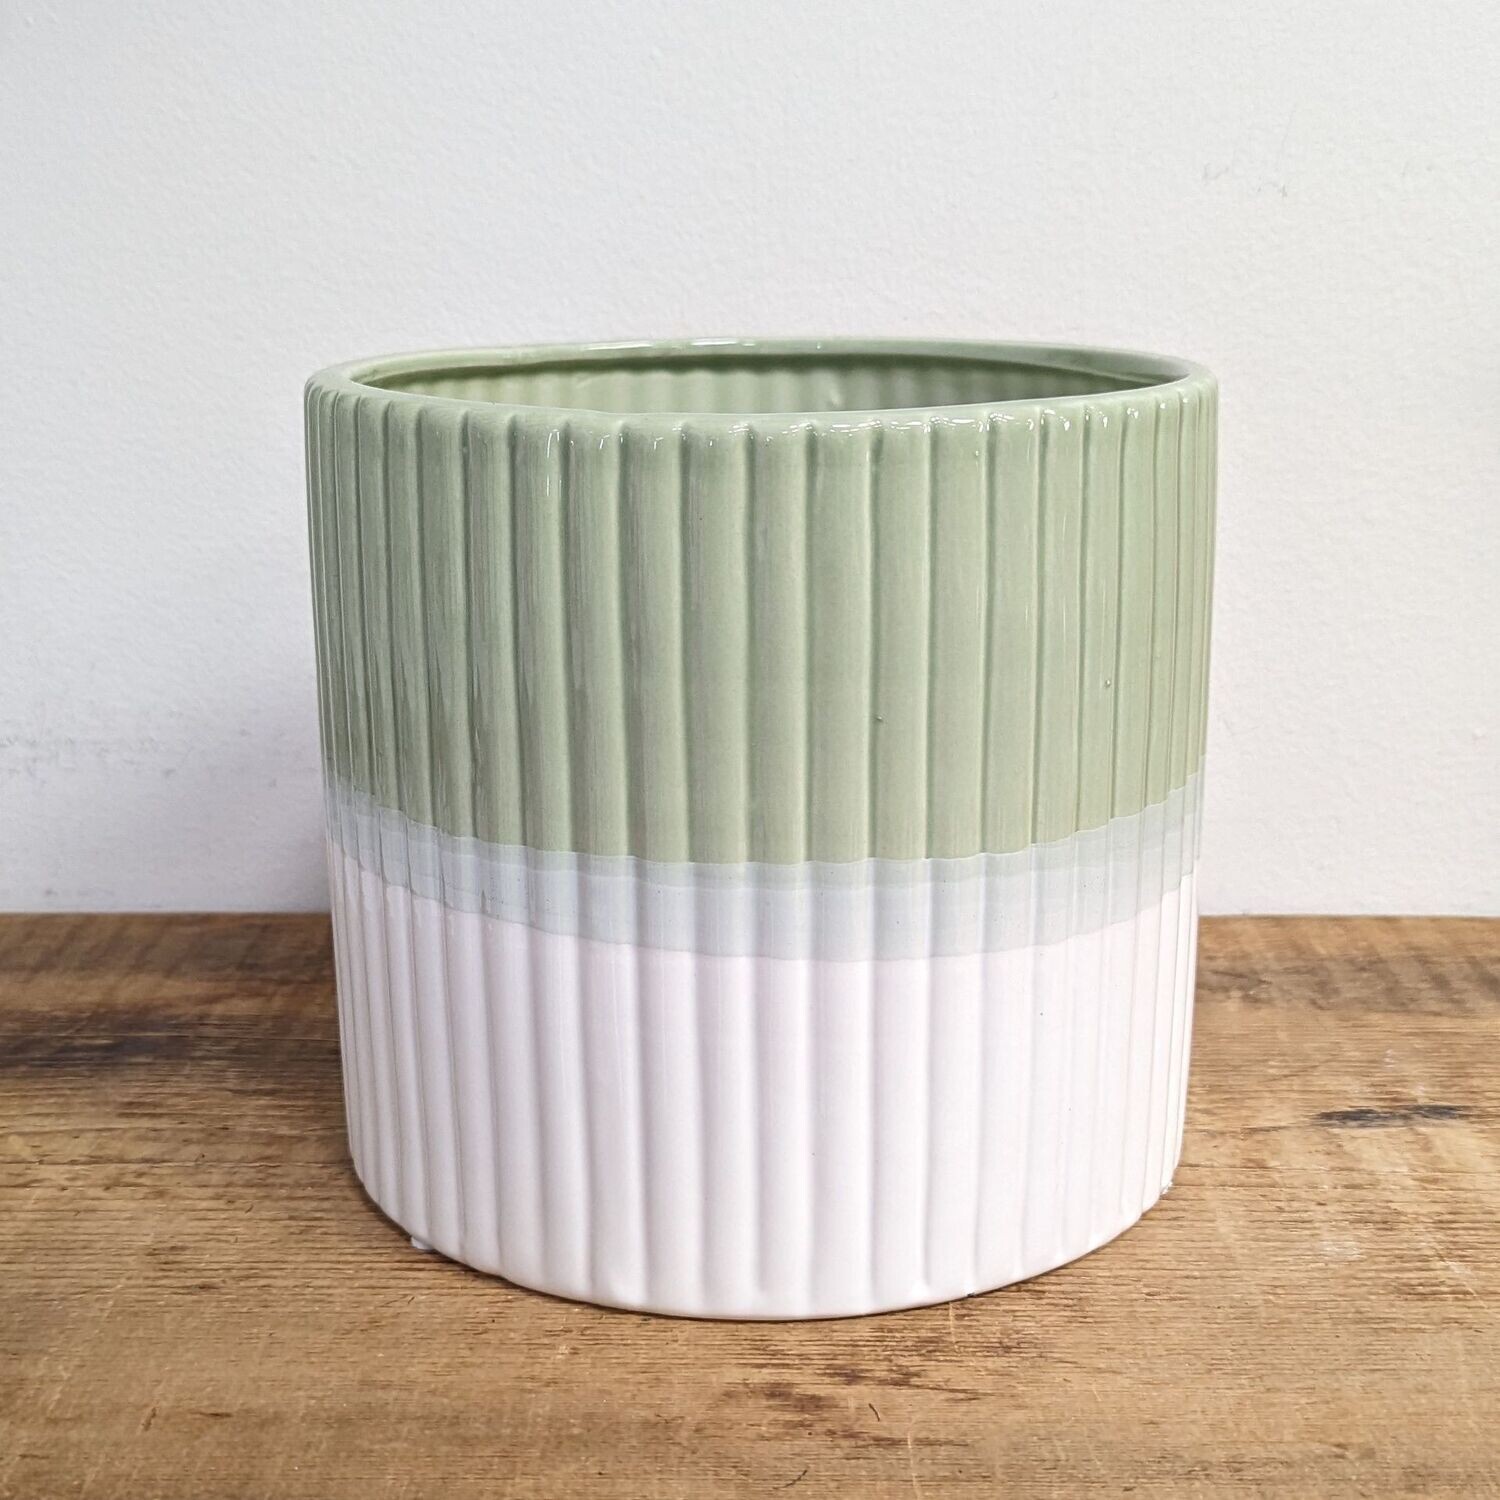 6" Ribbed Green and White Pot